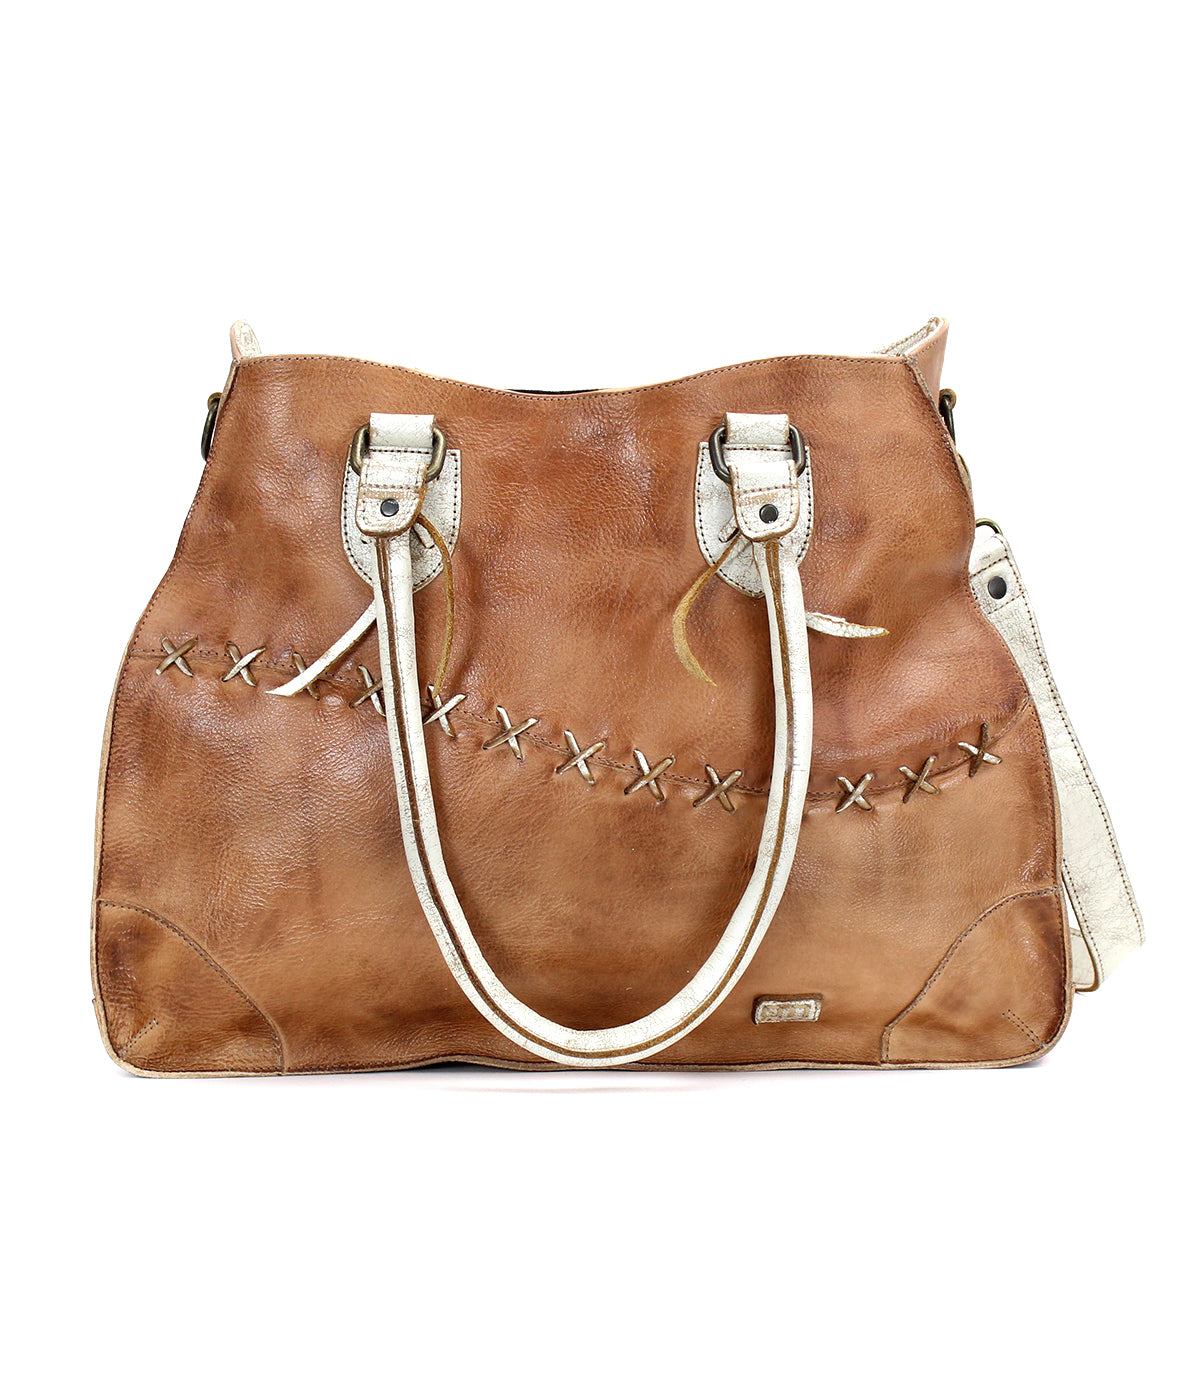 A brown leather handbag with white stitching and handles, featuring side buckles and a zipper closure on a white background. Perfect for outfit dilemmas from Bed|Stü's 'Shop the Look' Bundle!